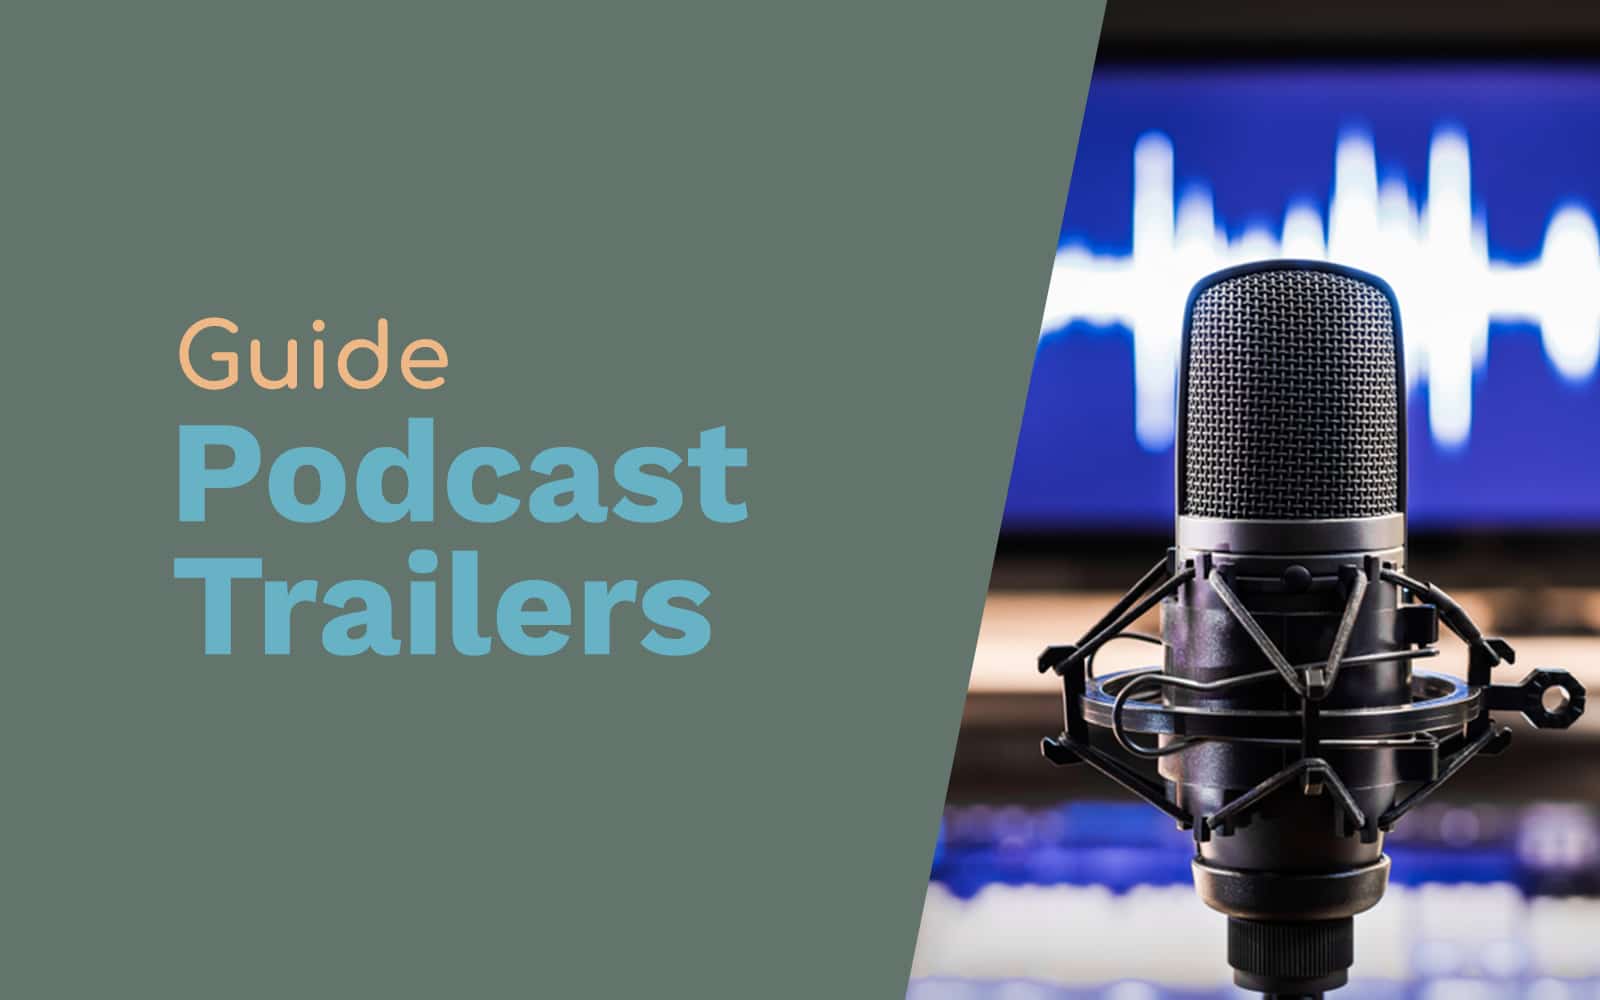 Podcast Trailers - What is a Podcast Trailer?